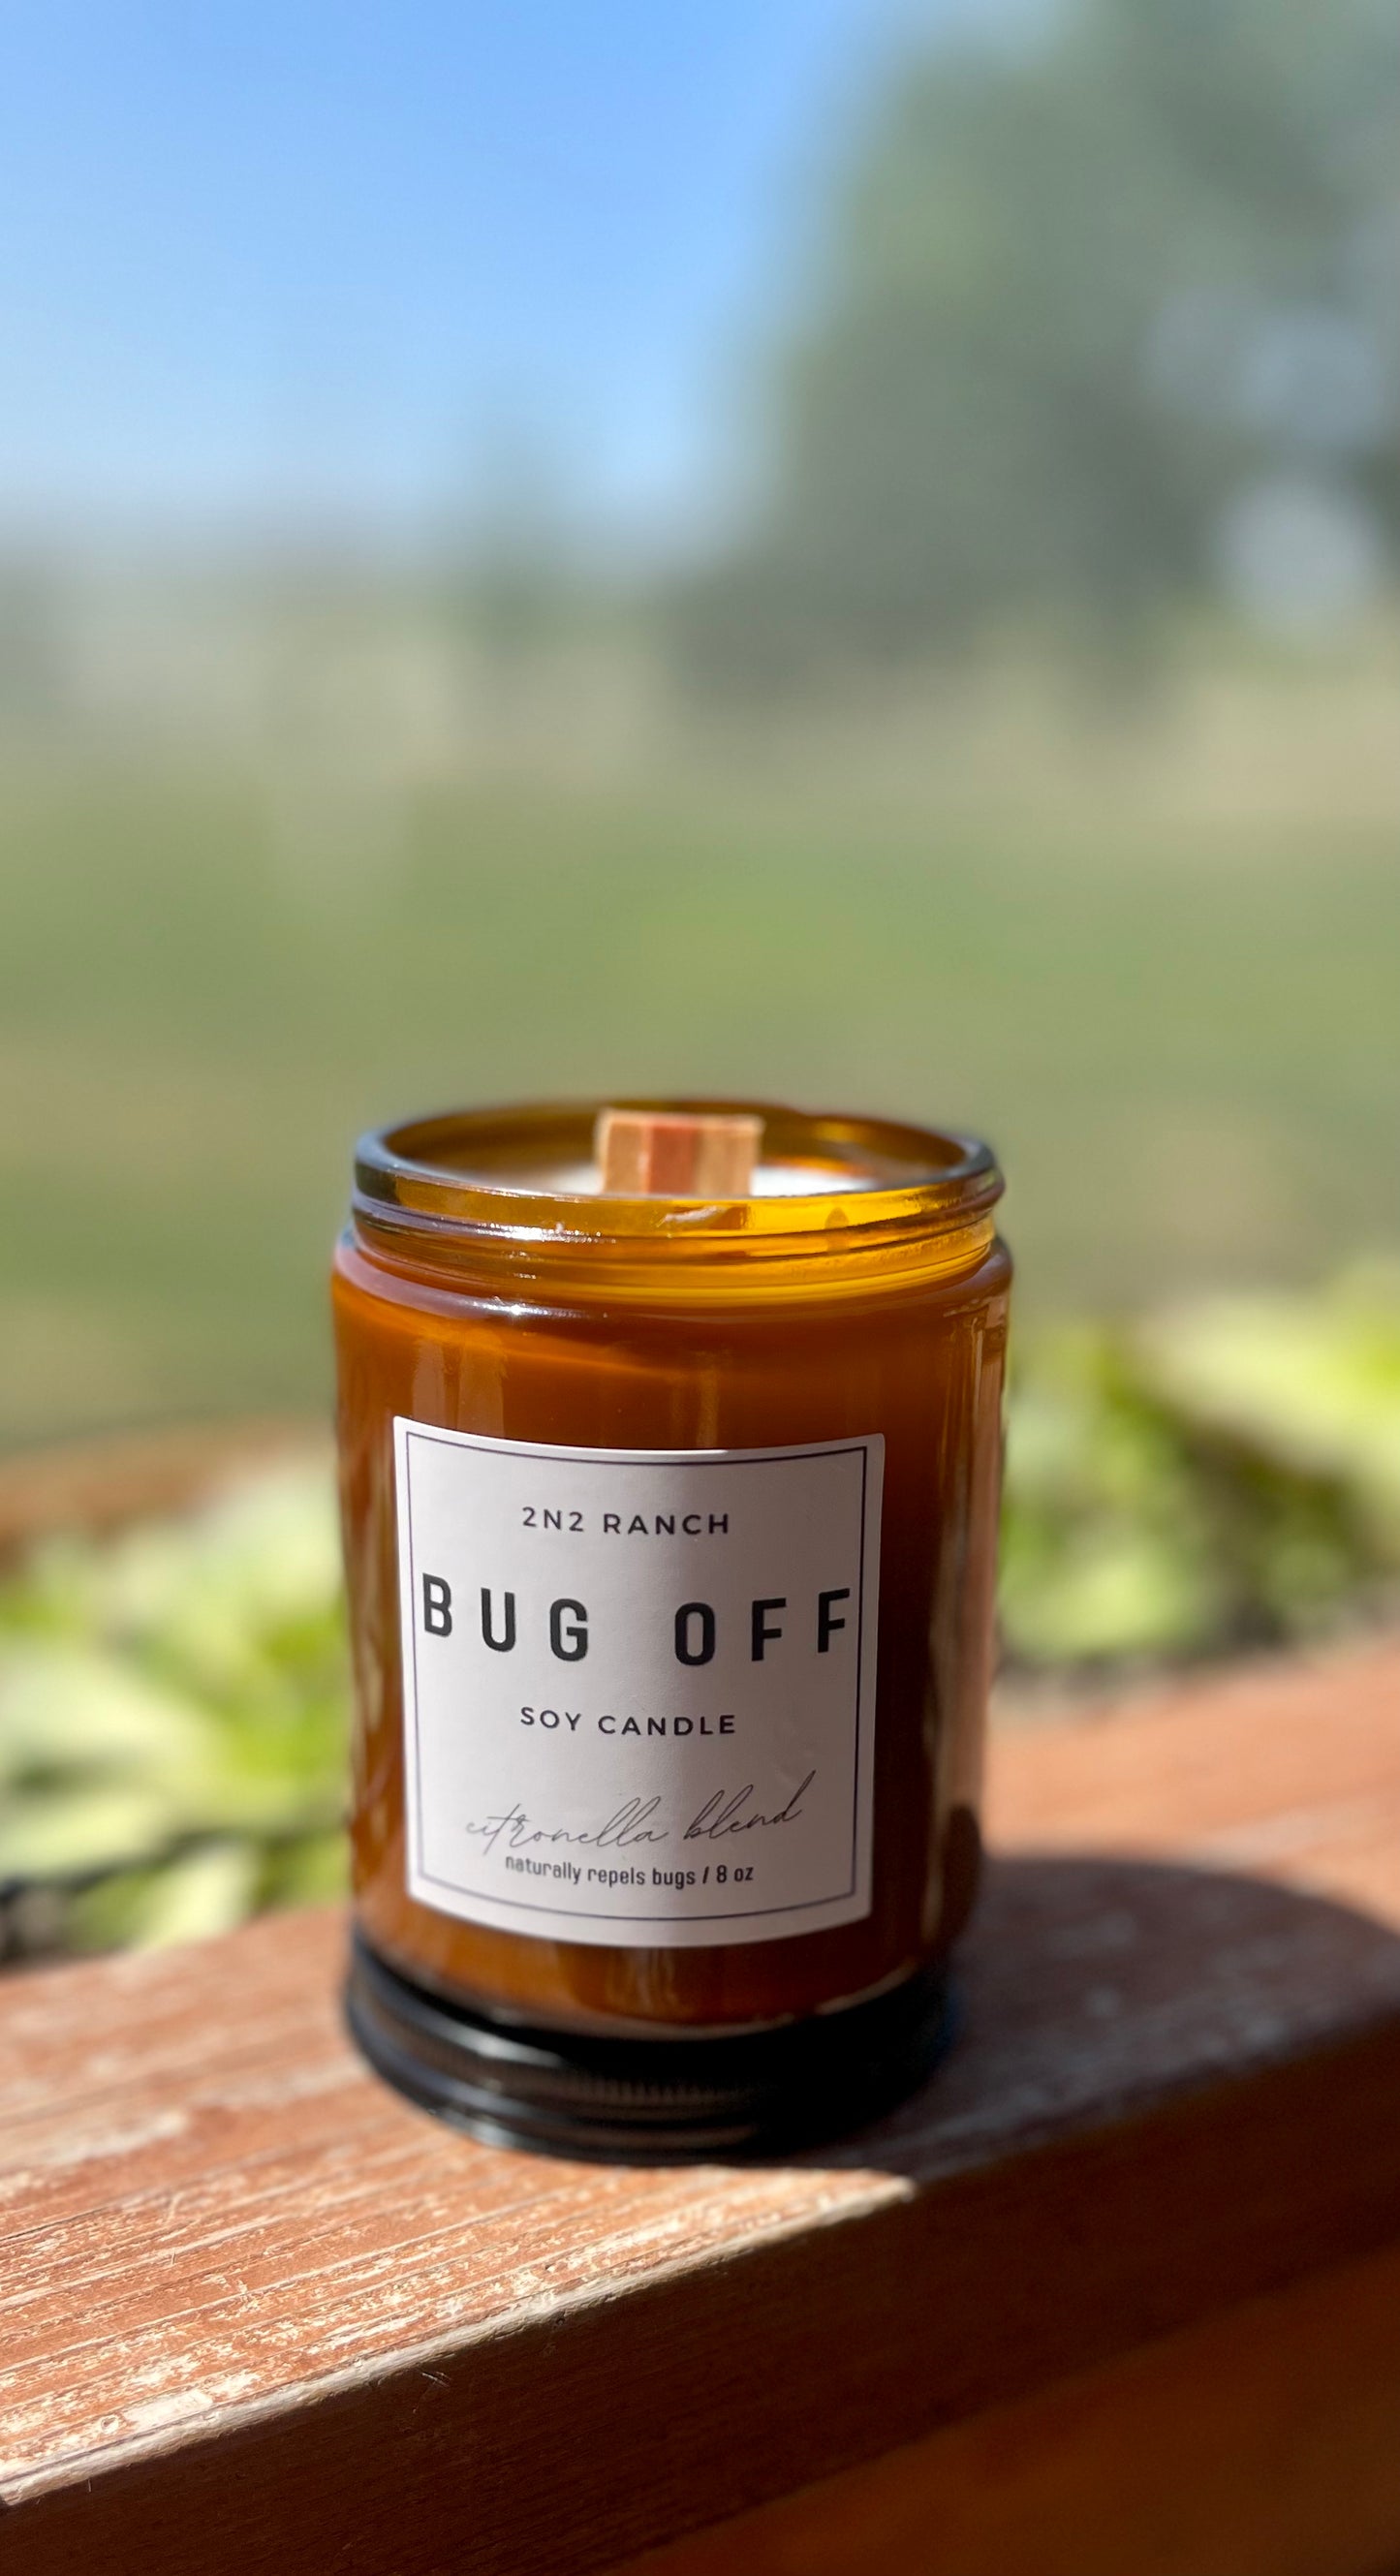 Citronella Candle | Soy Candle | Bug Off Soy Candle | Naturally Repel Bugs